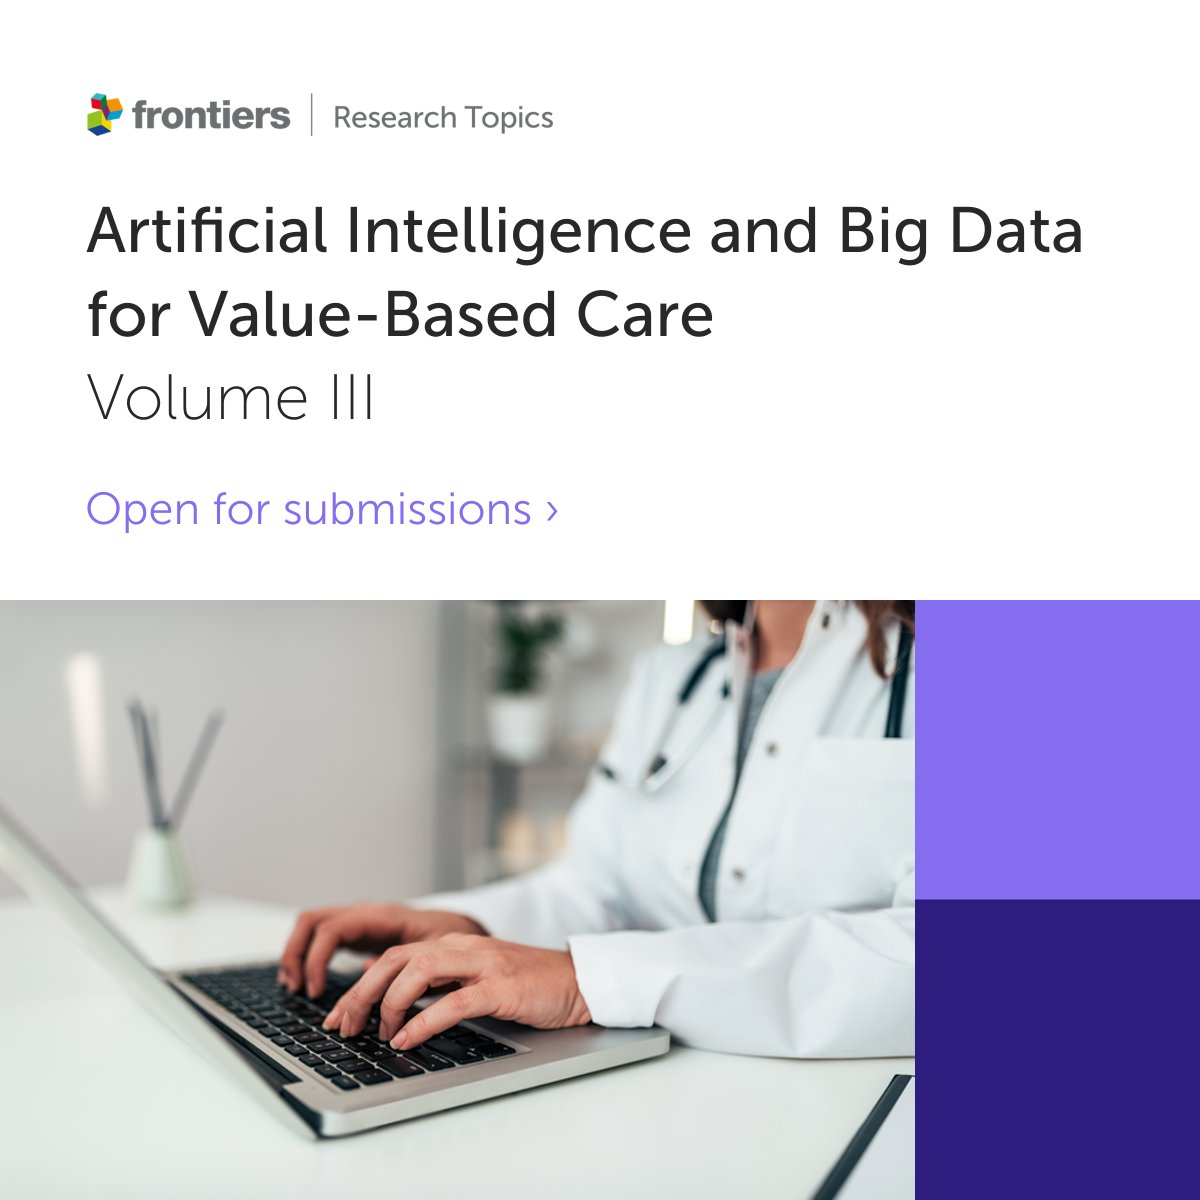 📢 Call for papers! Submissions are open for 'Artificial Intelligence and Big Data for Value-Based Care - Volume III' Edited by Md. Mohaimenul Islam and Ming-Chin Lin Contribute or find out more ➡️ fro.ntiers.in/62940